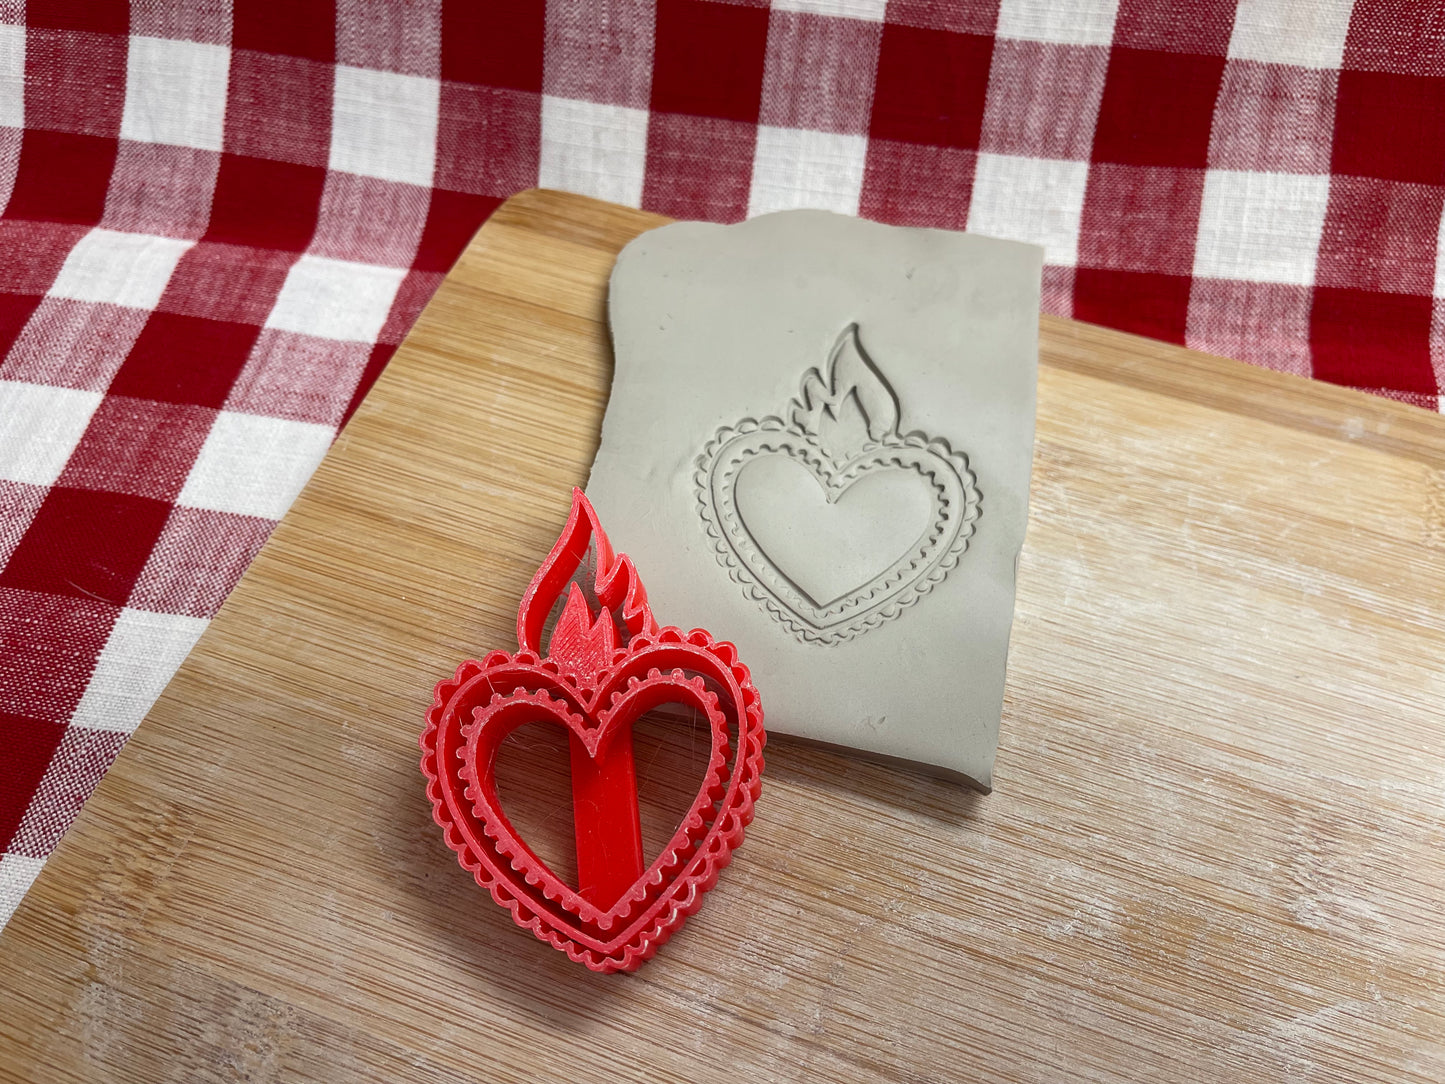 Heart Stamp, Day of the Dead Design, plastic 3D printed, pottery tool